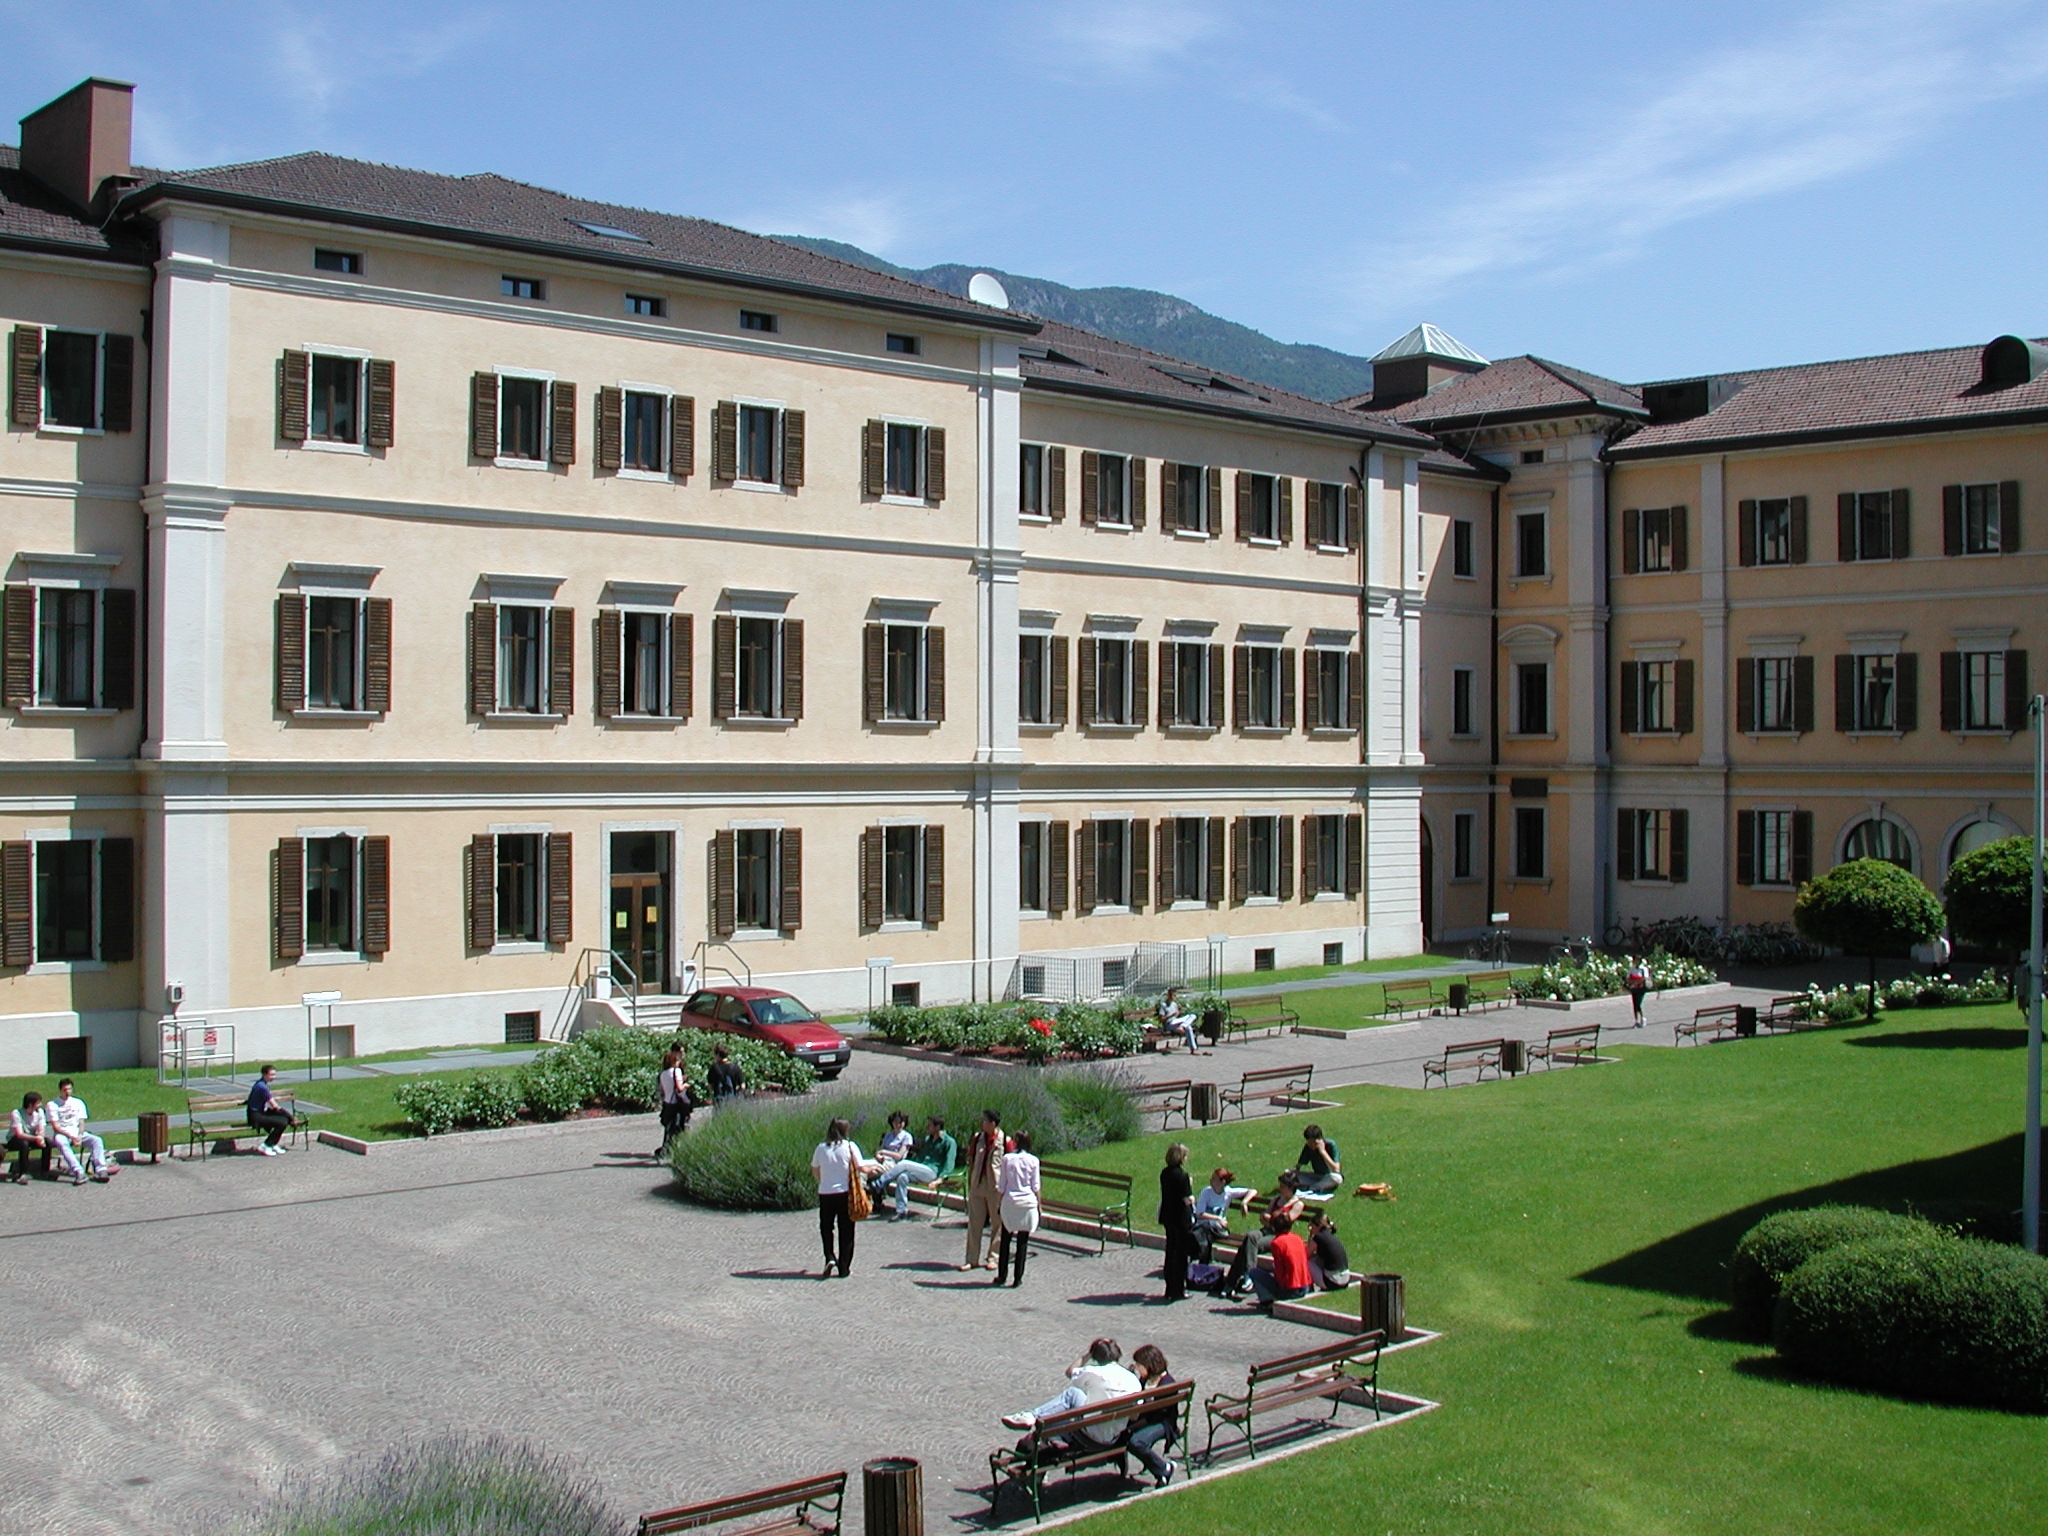 The department inner courtyard